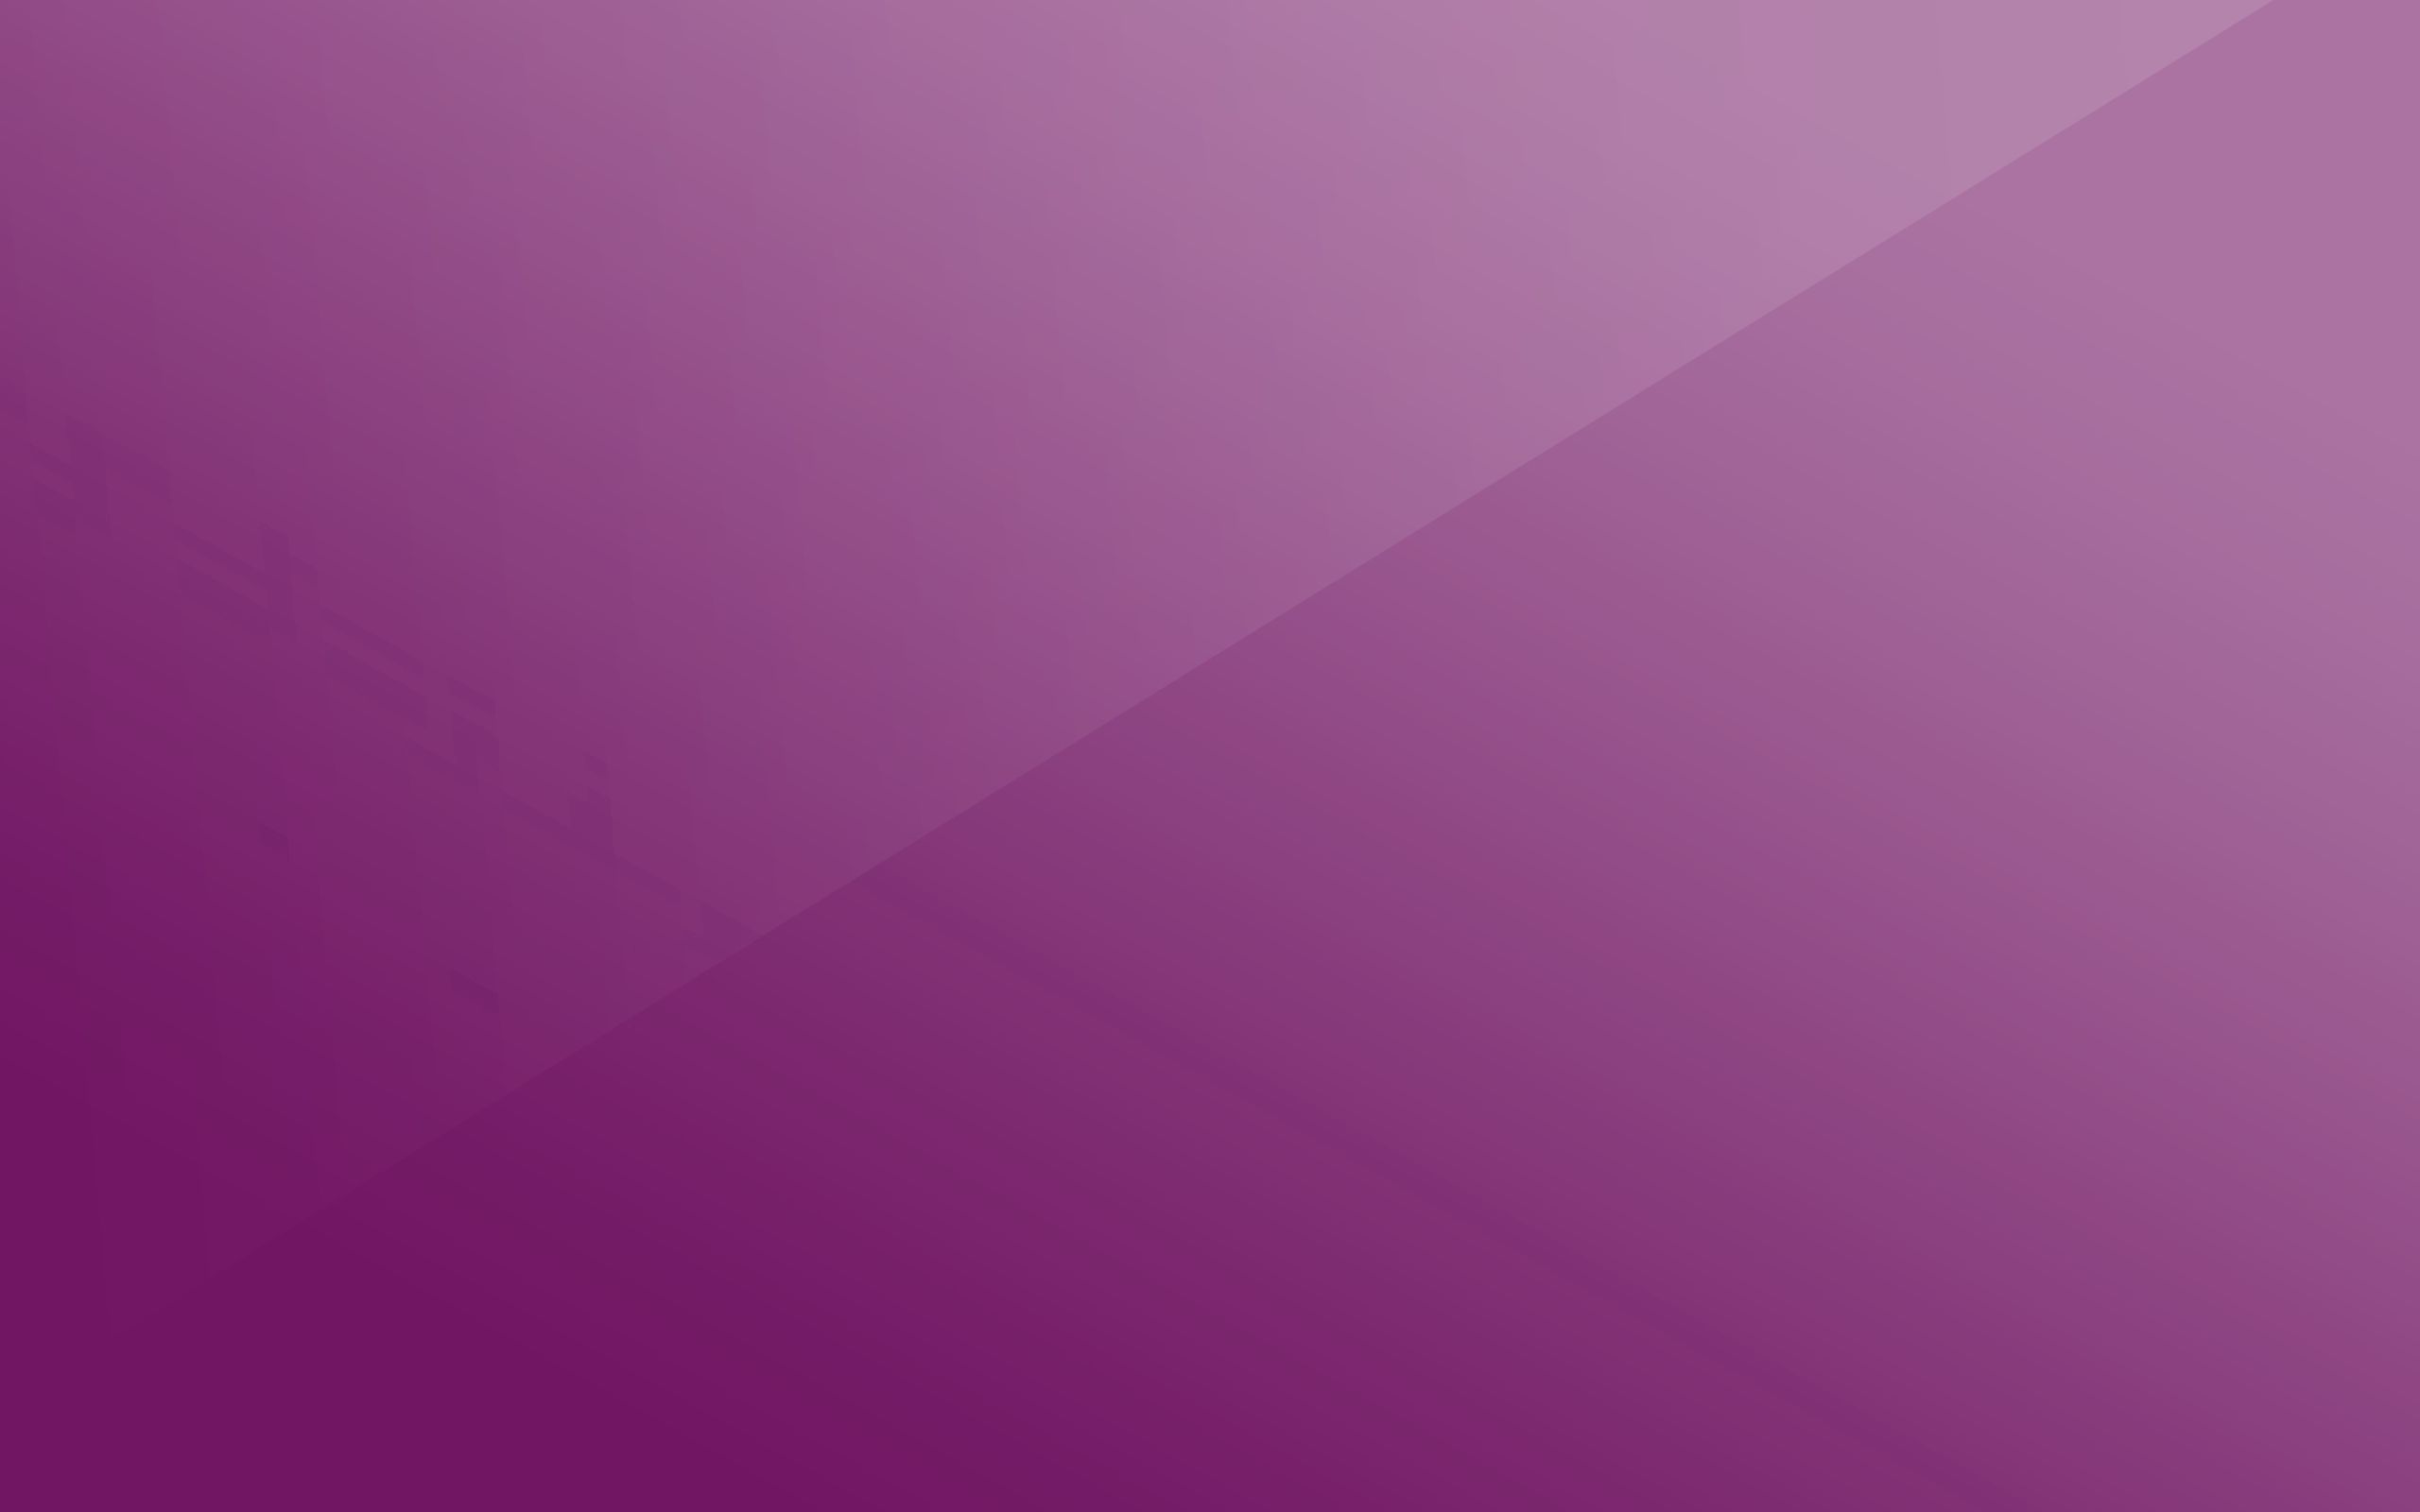 purple, abstract, light coloured, surface, background, violet, light, lines wallpapers for tablet